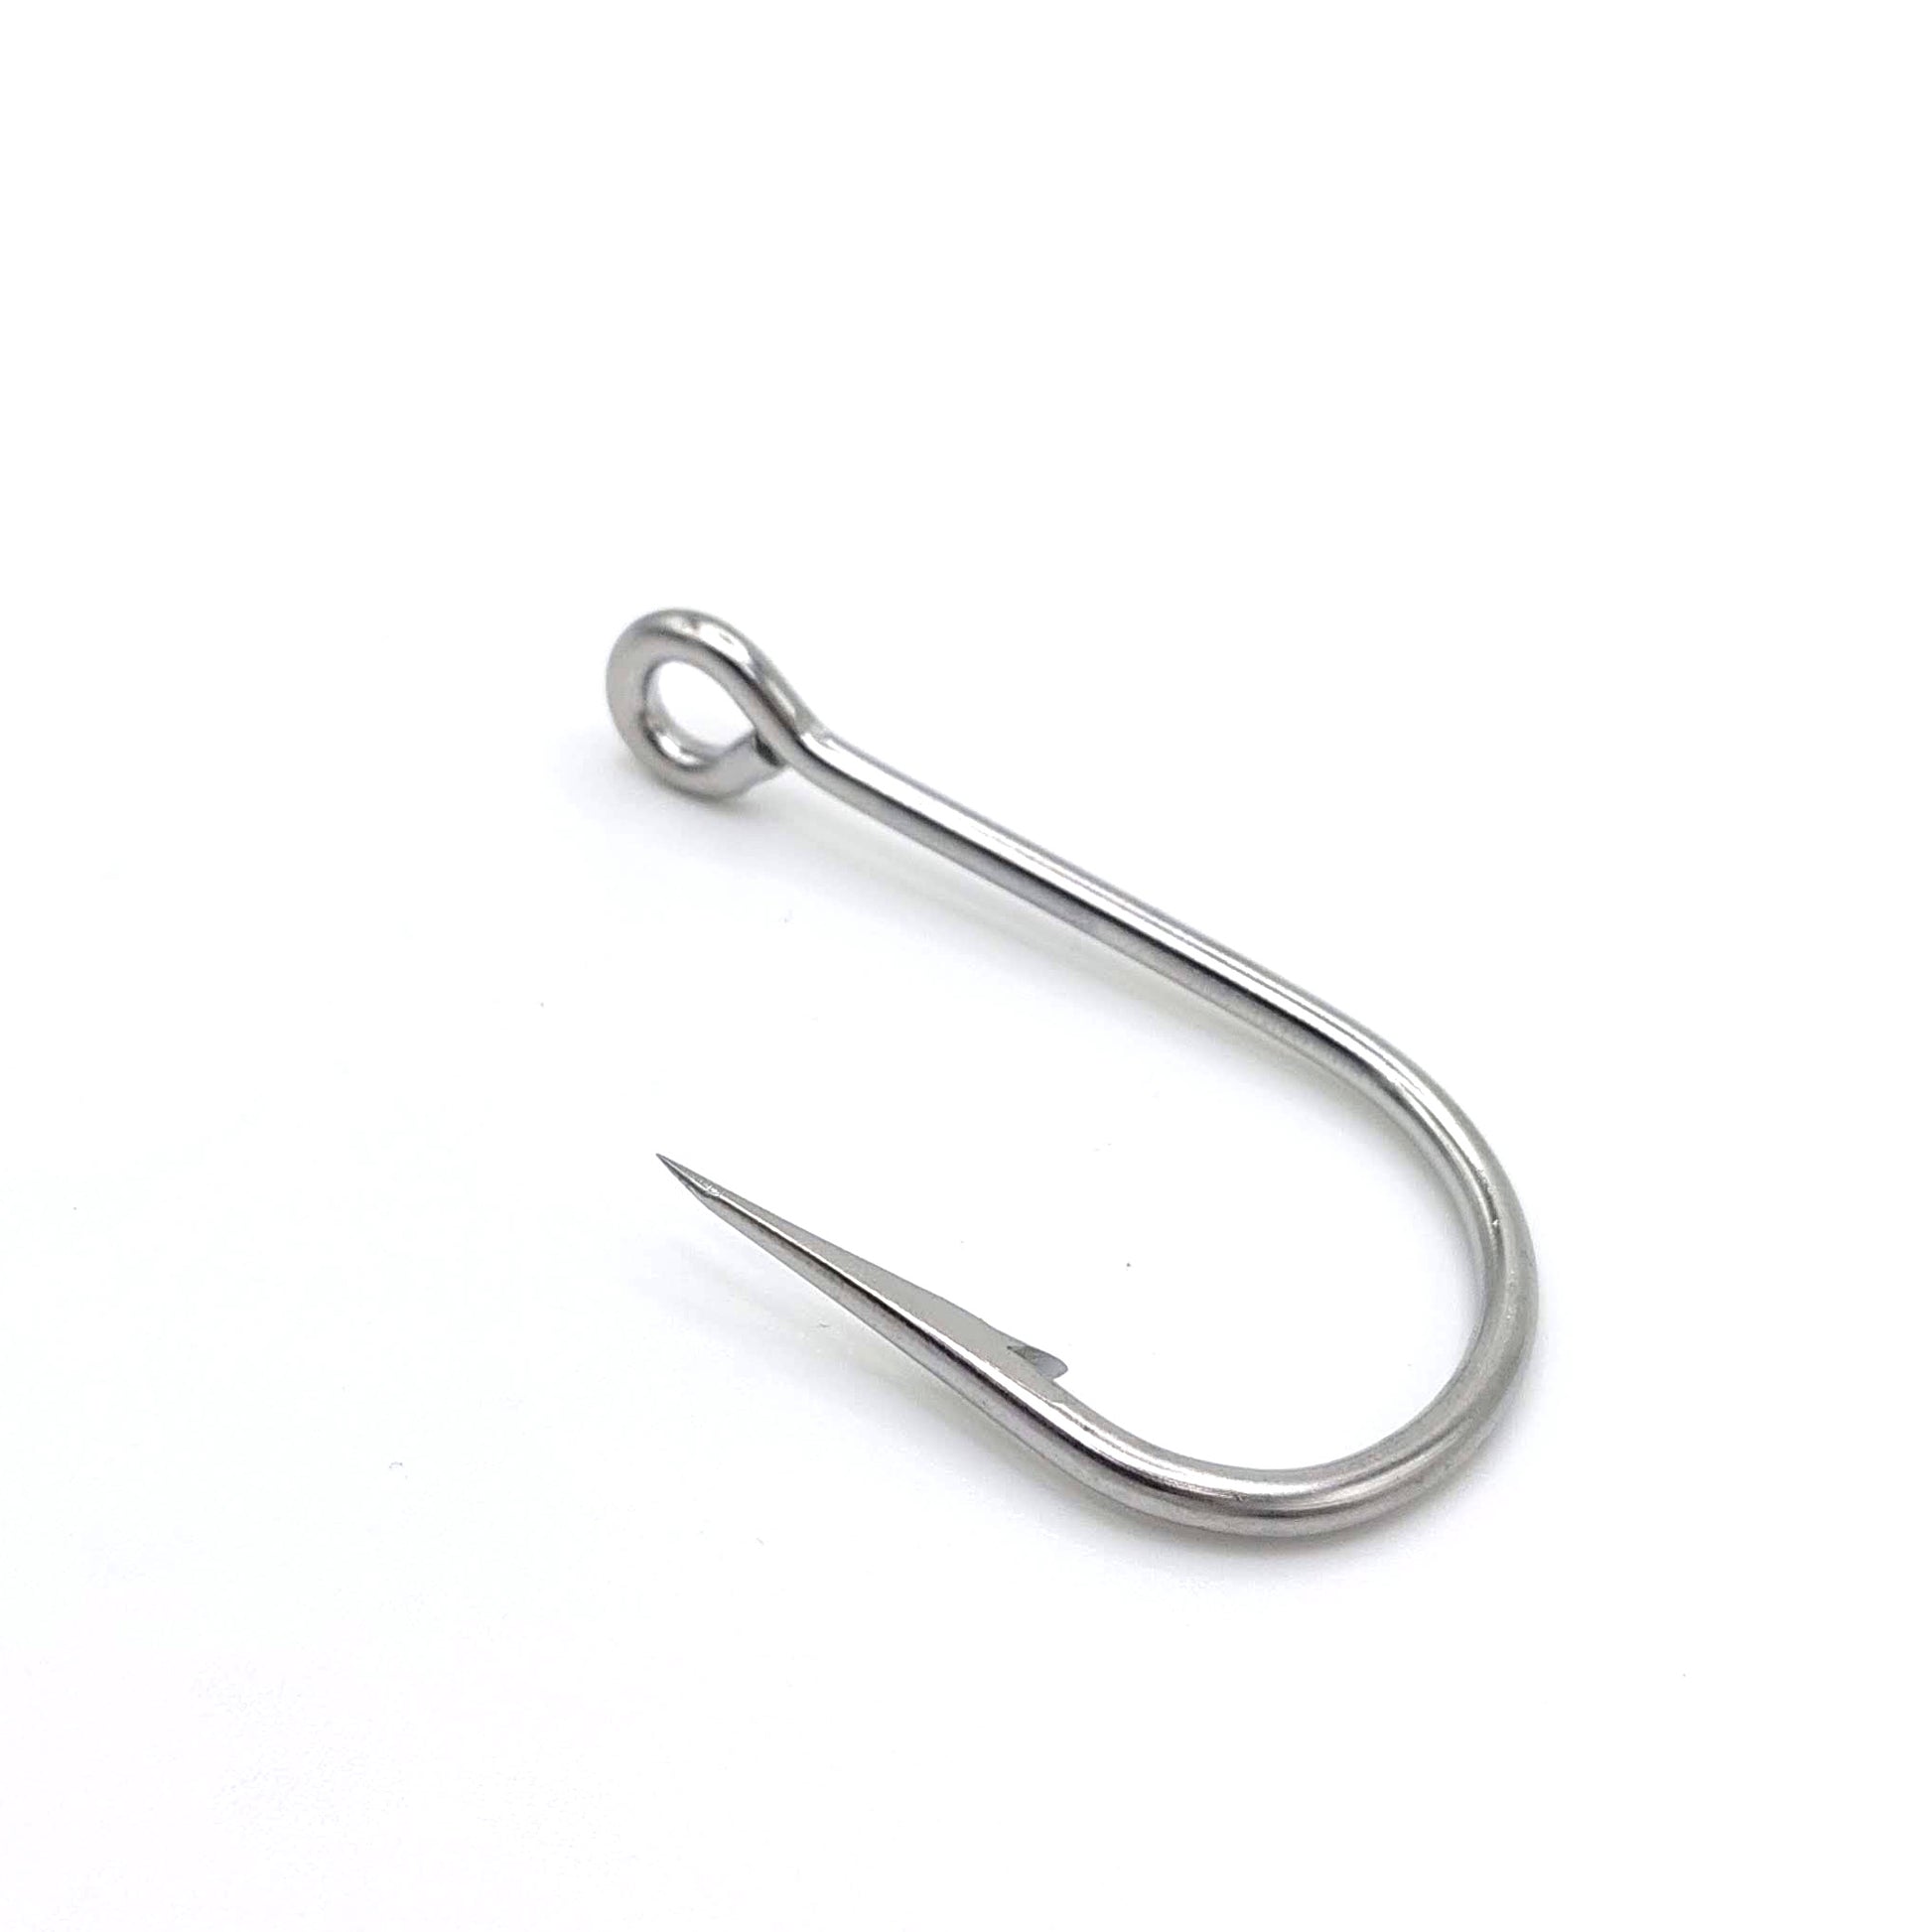 95160-SS Mustad Siwash Hook Stainless Steel 3X Strong